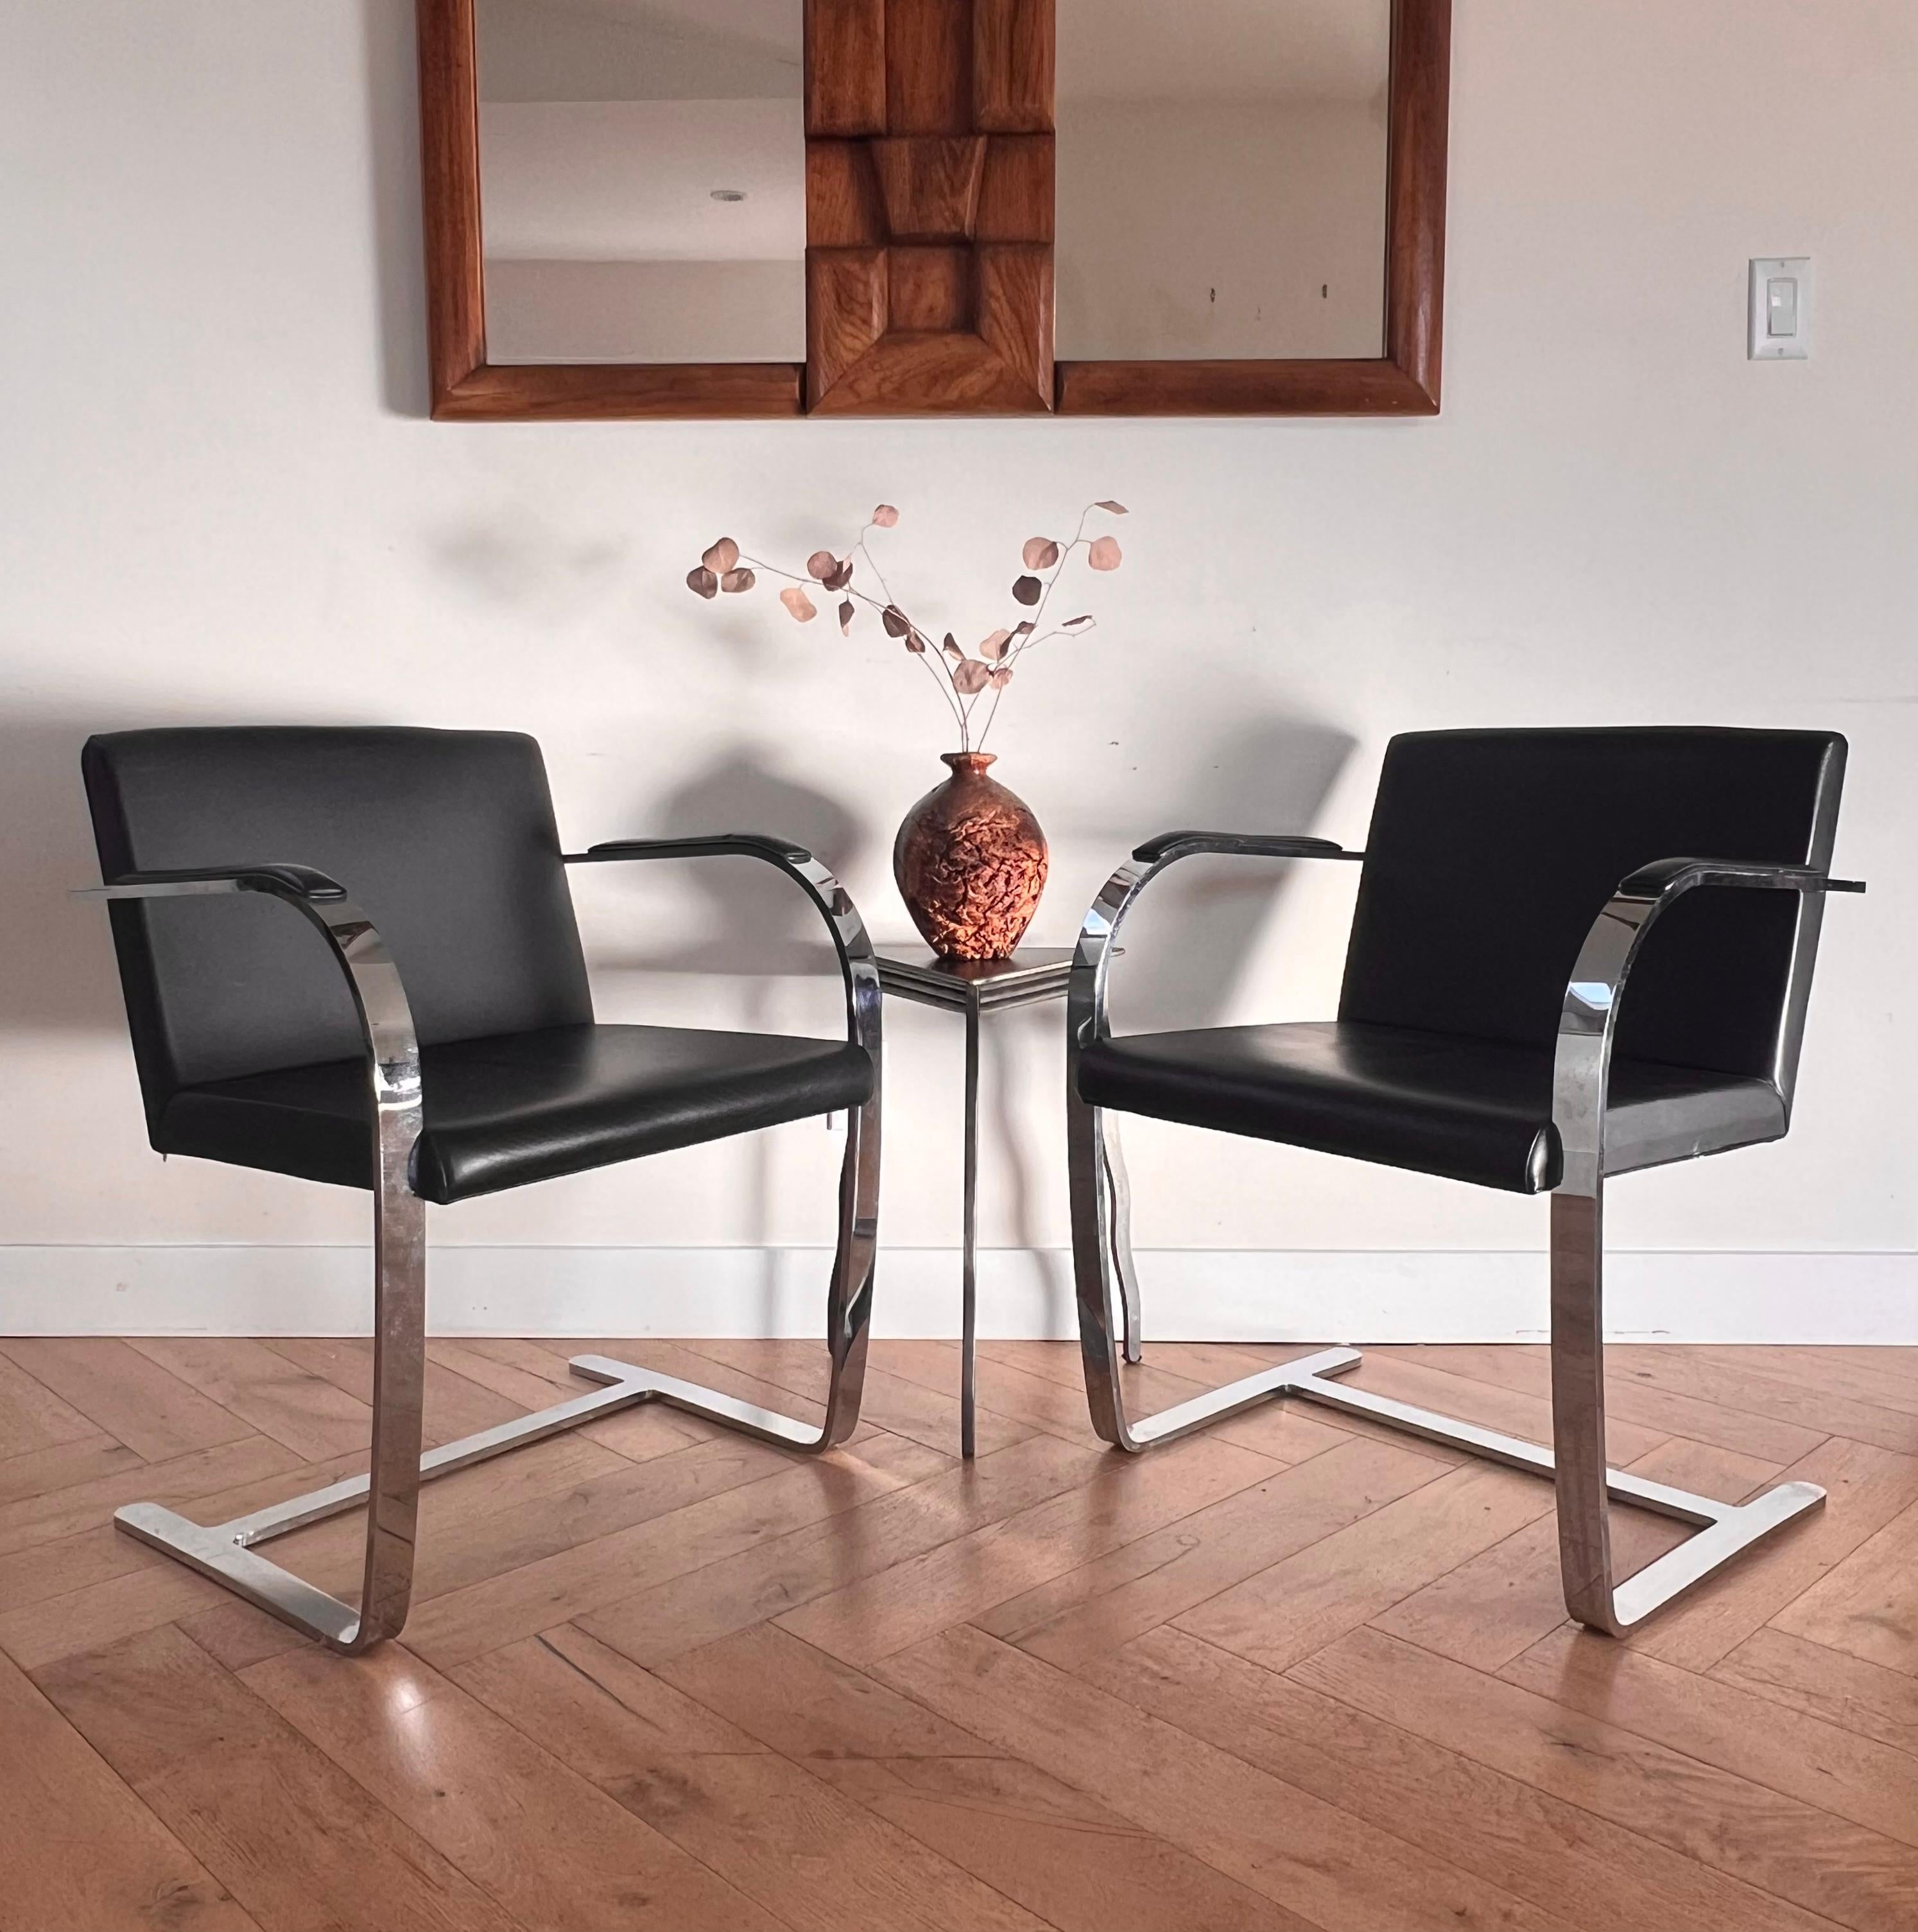 Bauhaus Pair of Mies van der Rohe Brno chairs by Palazzetti, 1970s For Sale